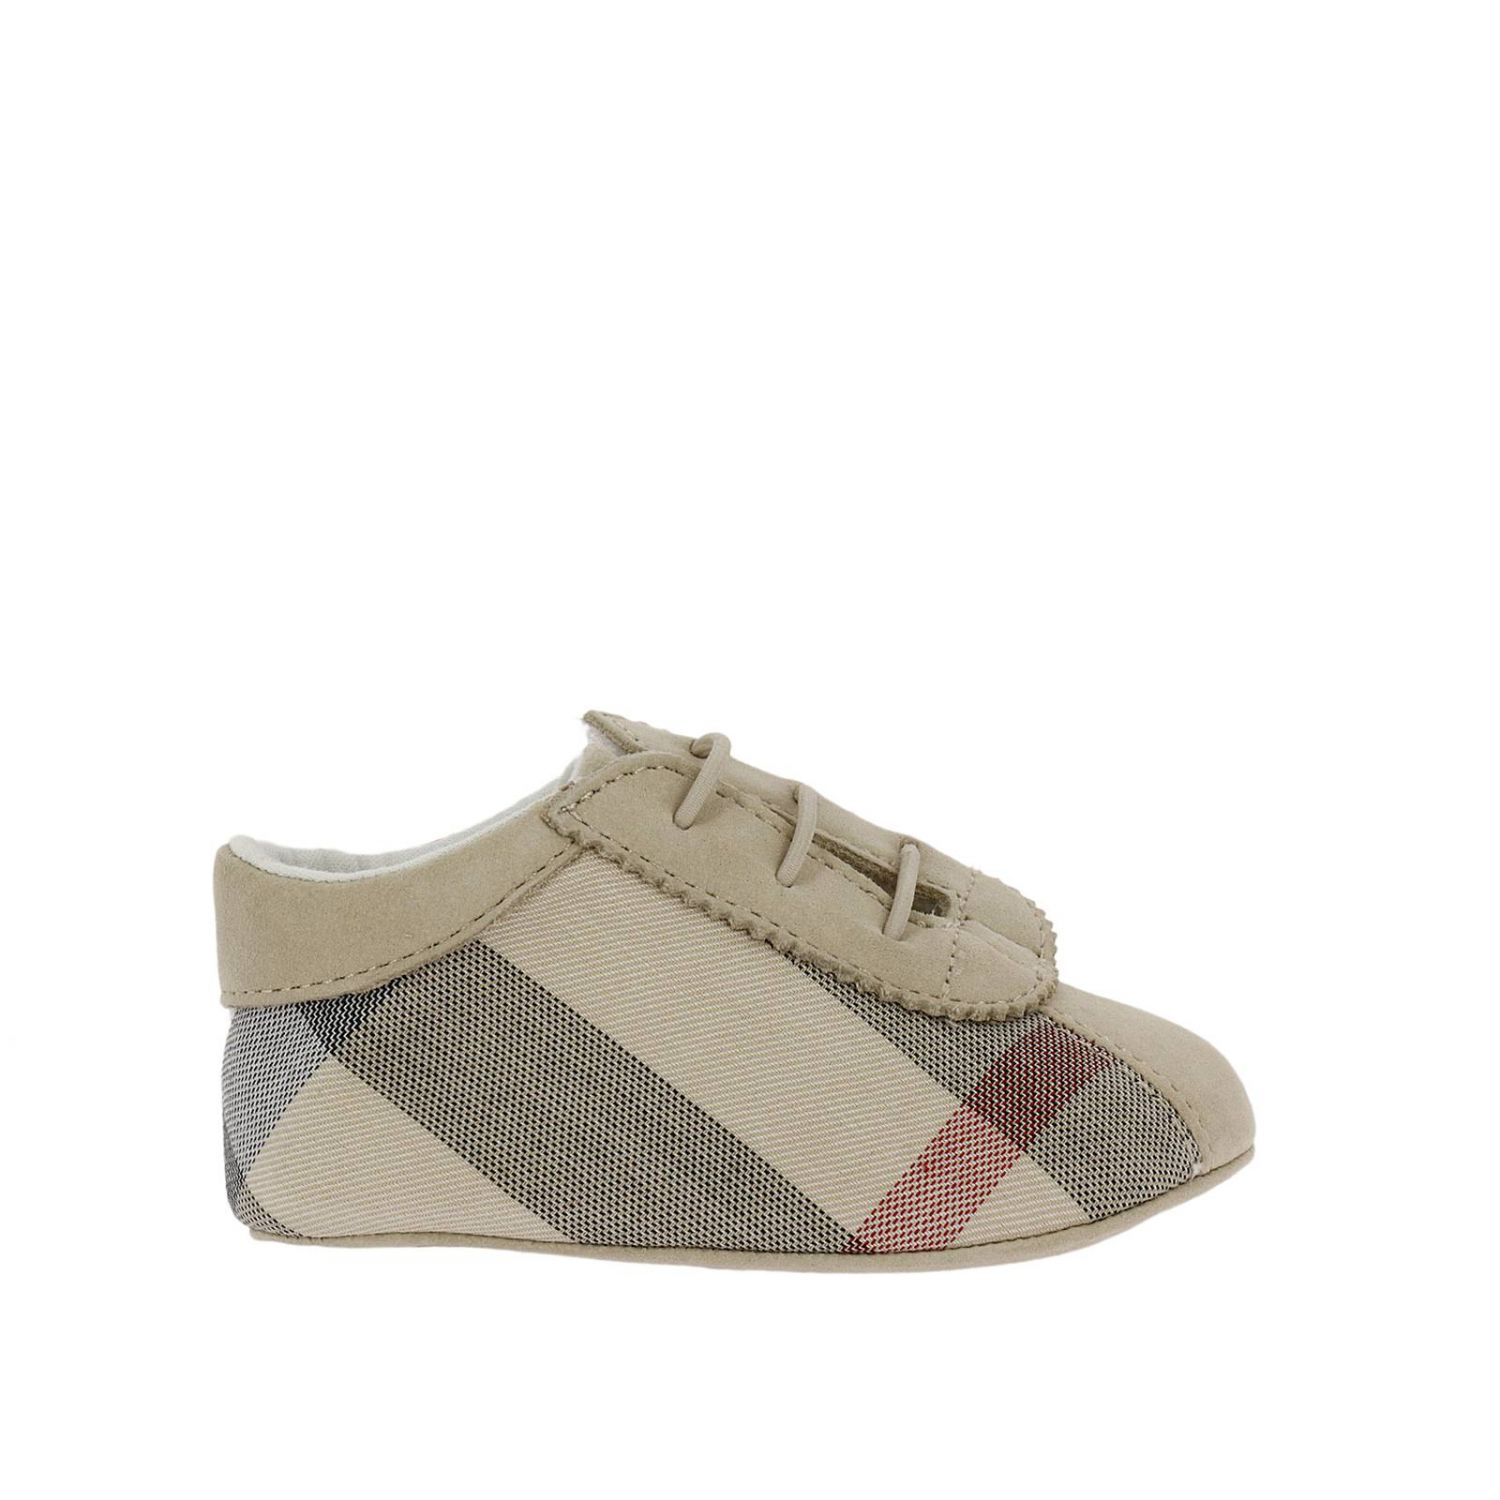 burberry shoes kids grey